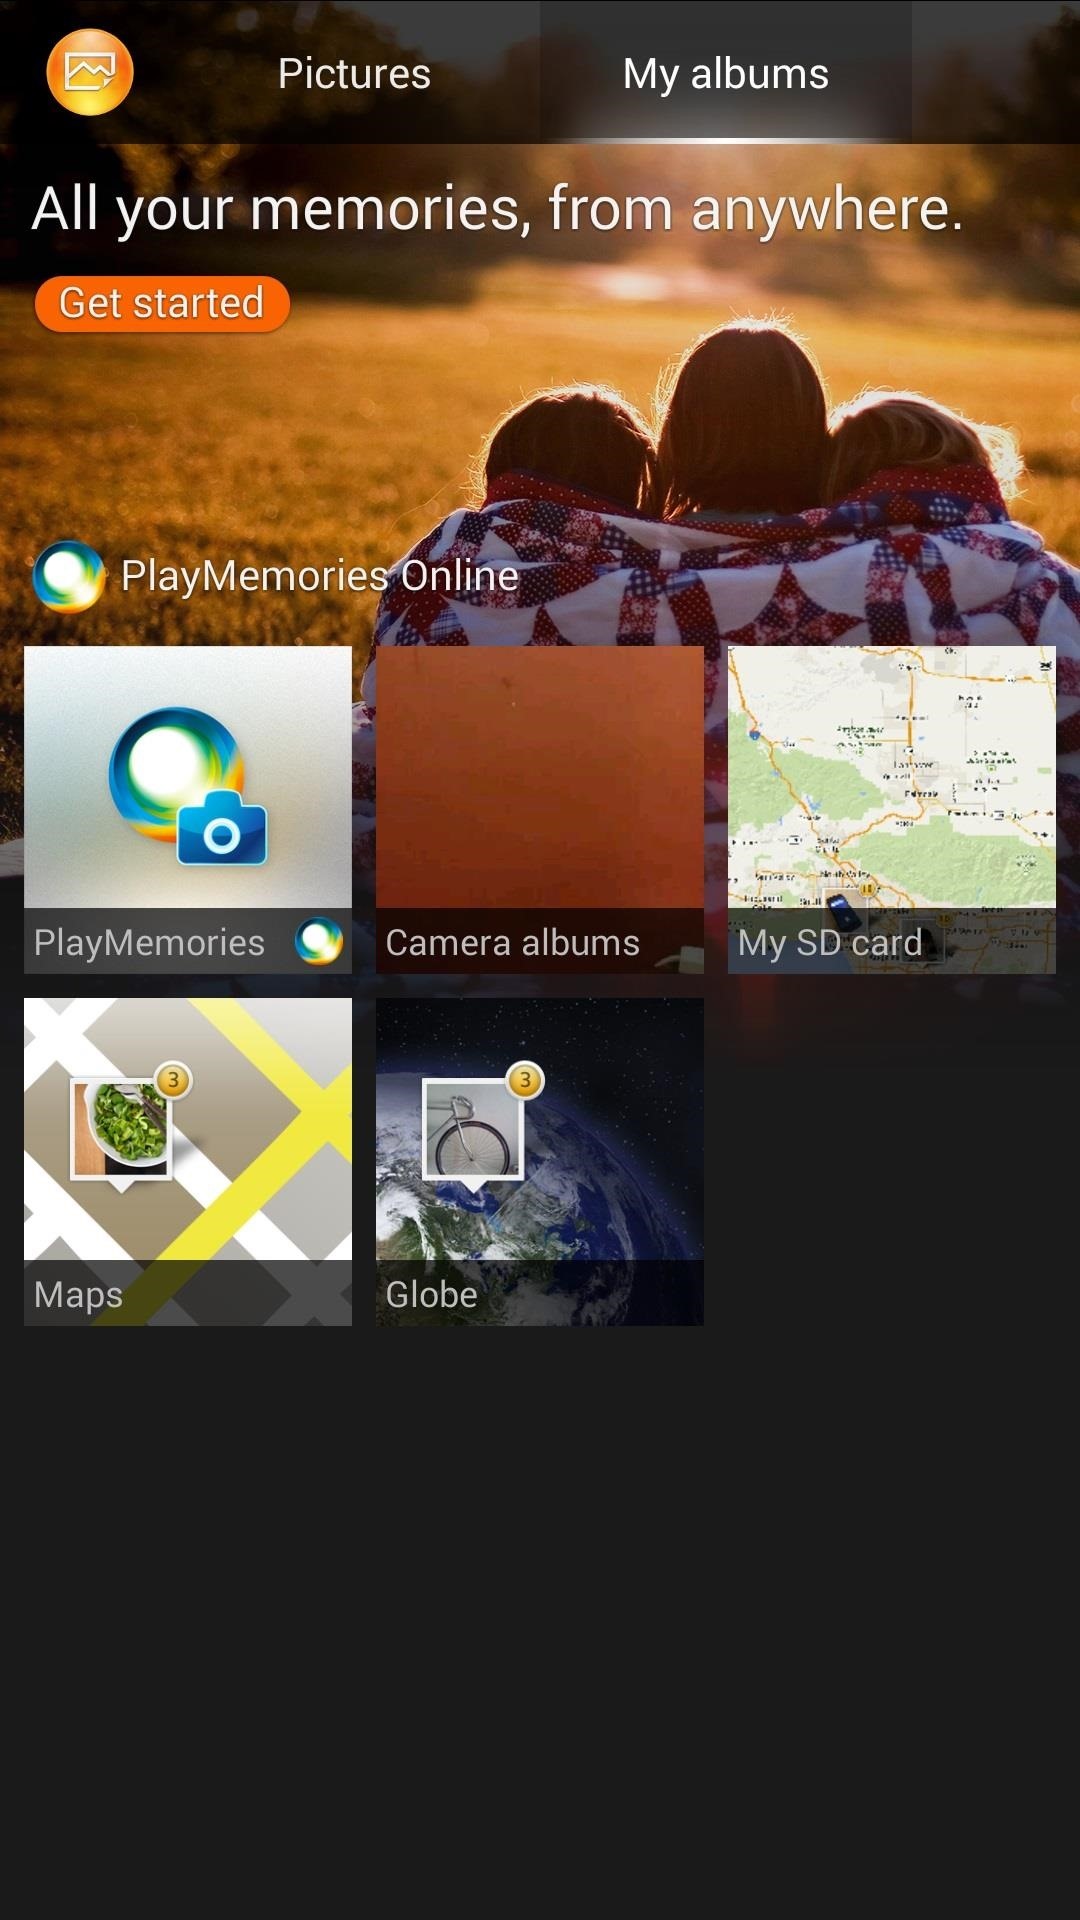 How to Get Sony's Exclusive Media Apps (Album, Movies, & Walkman) on Your Samsung Galaxy Note 3